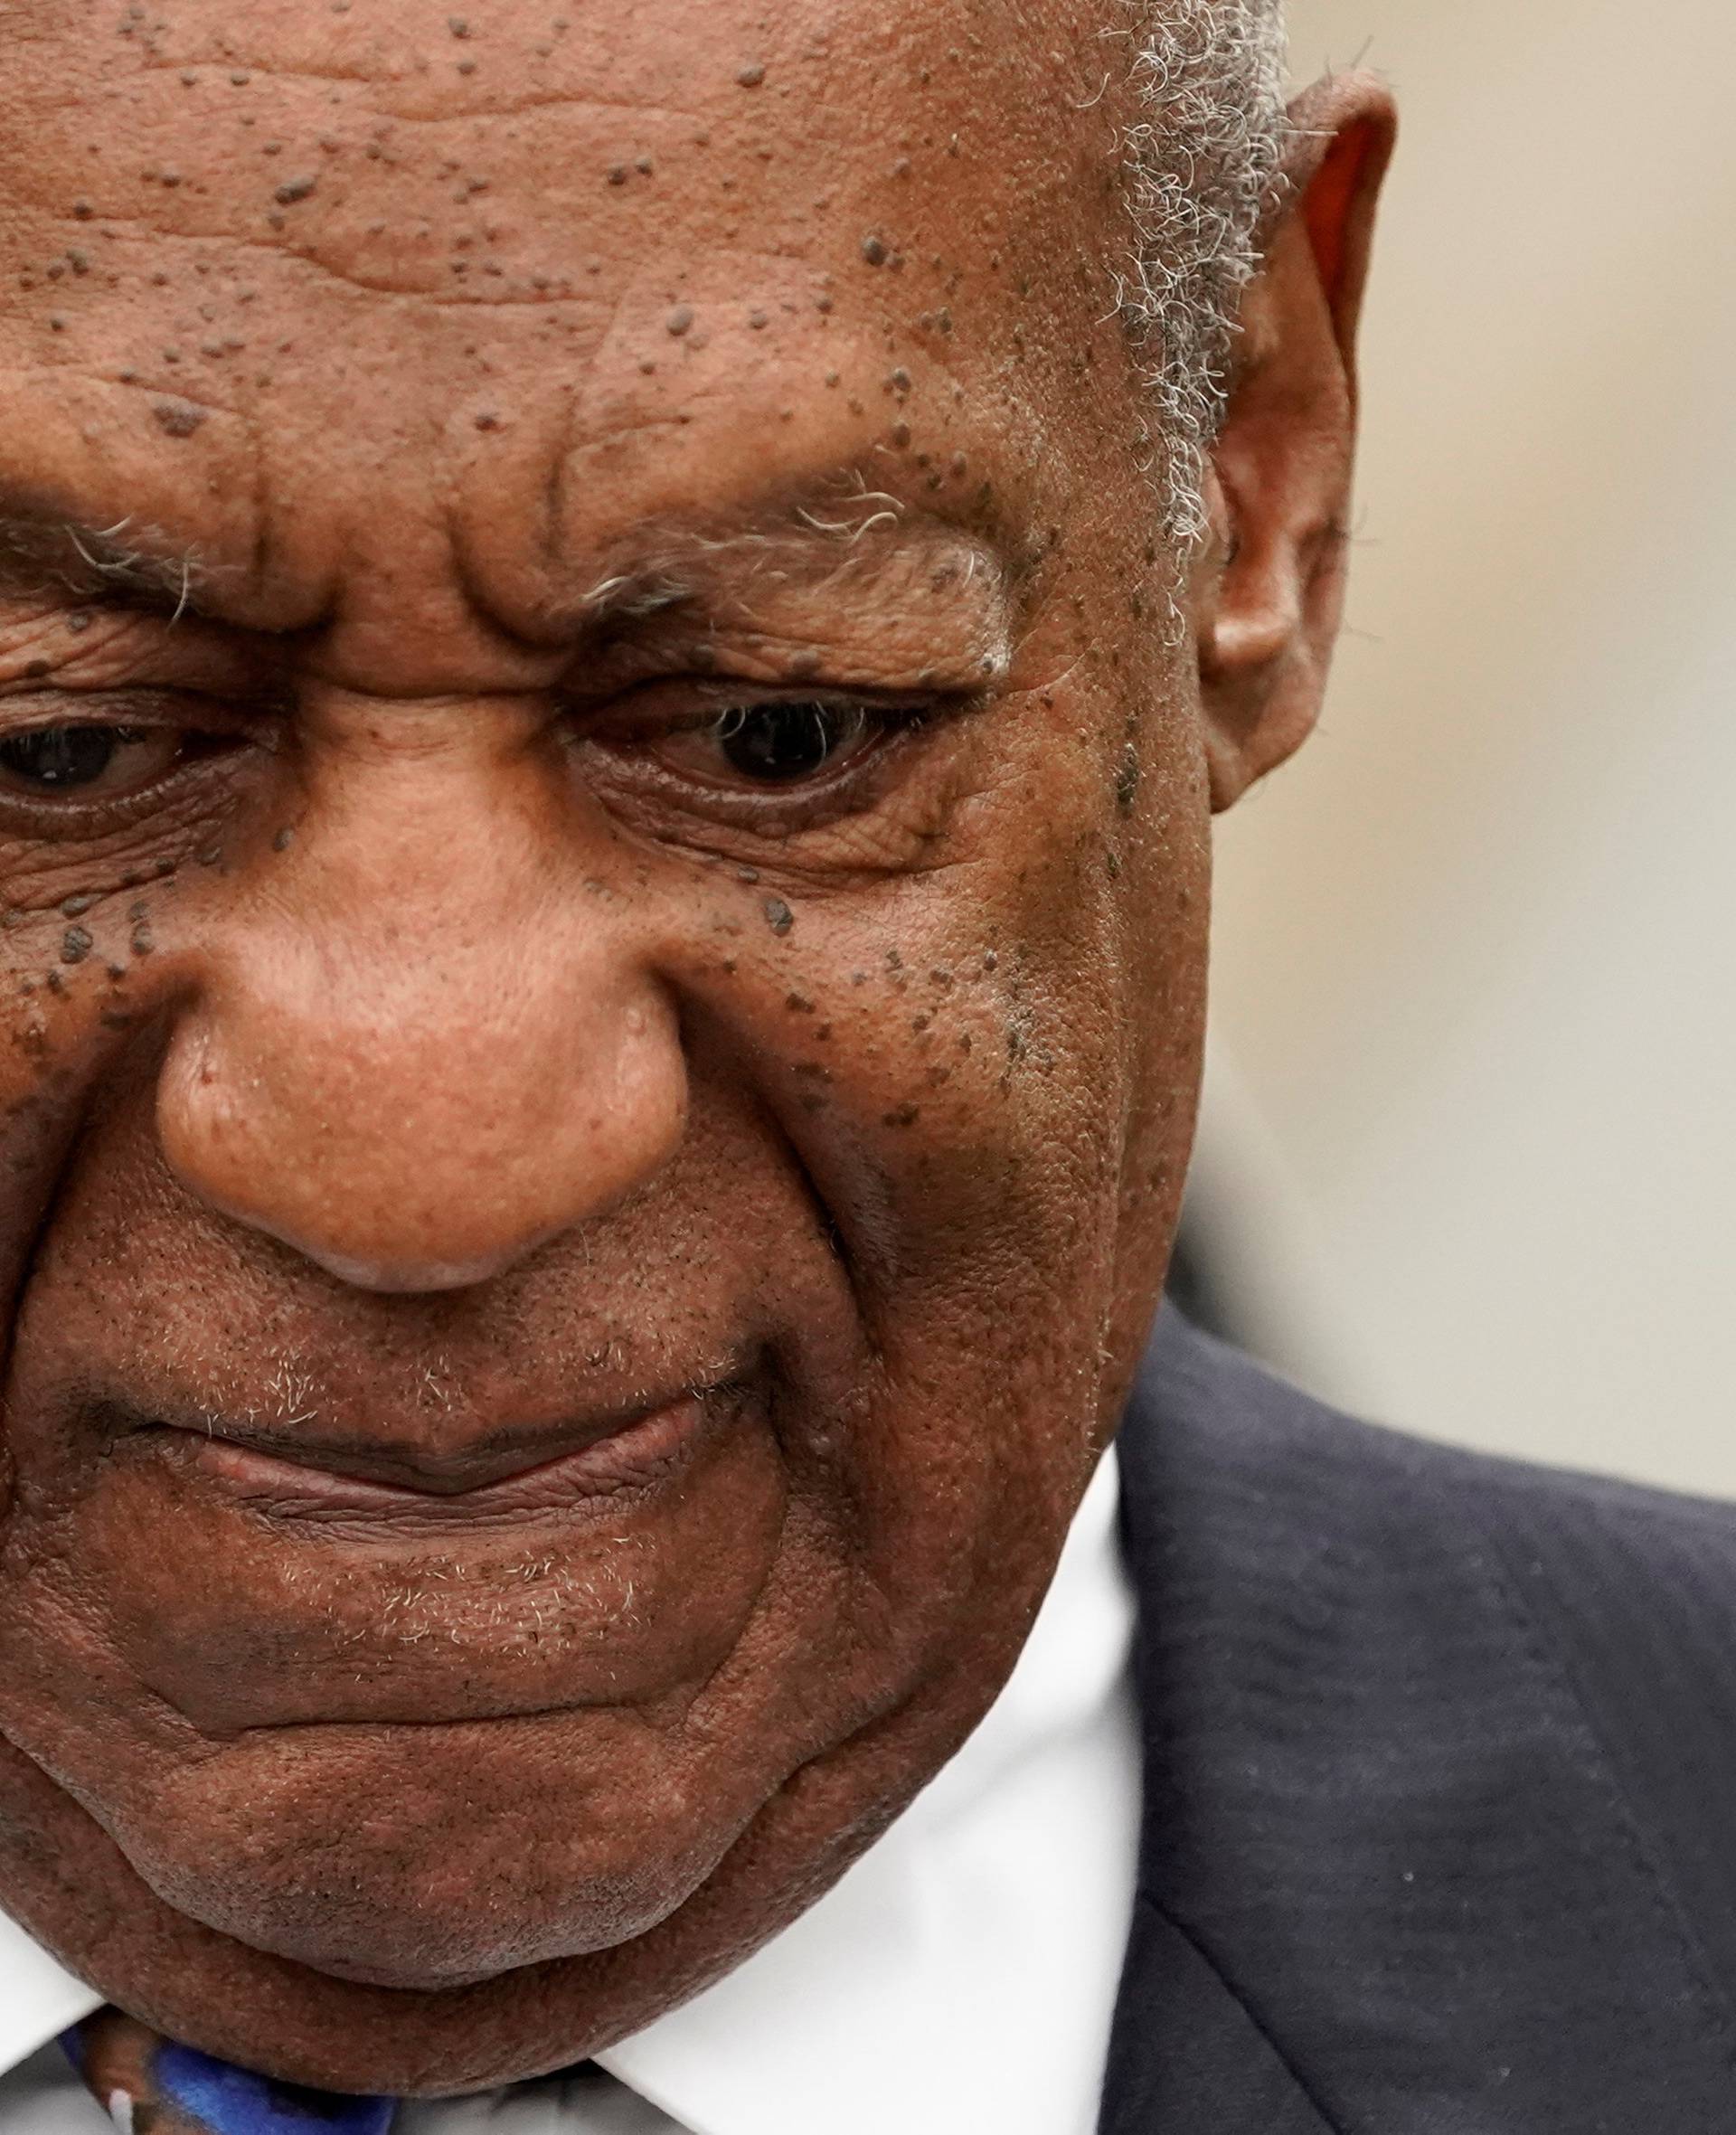 FILE PHOTO: Actor and comedian Bill Cosby leaves the Montgomery County Courthouse after his first day of sentencing hearings in his sexual assault trial in Norristown